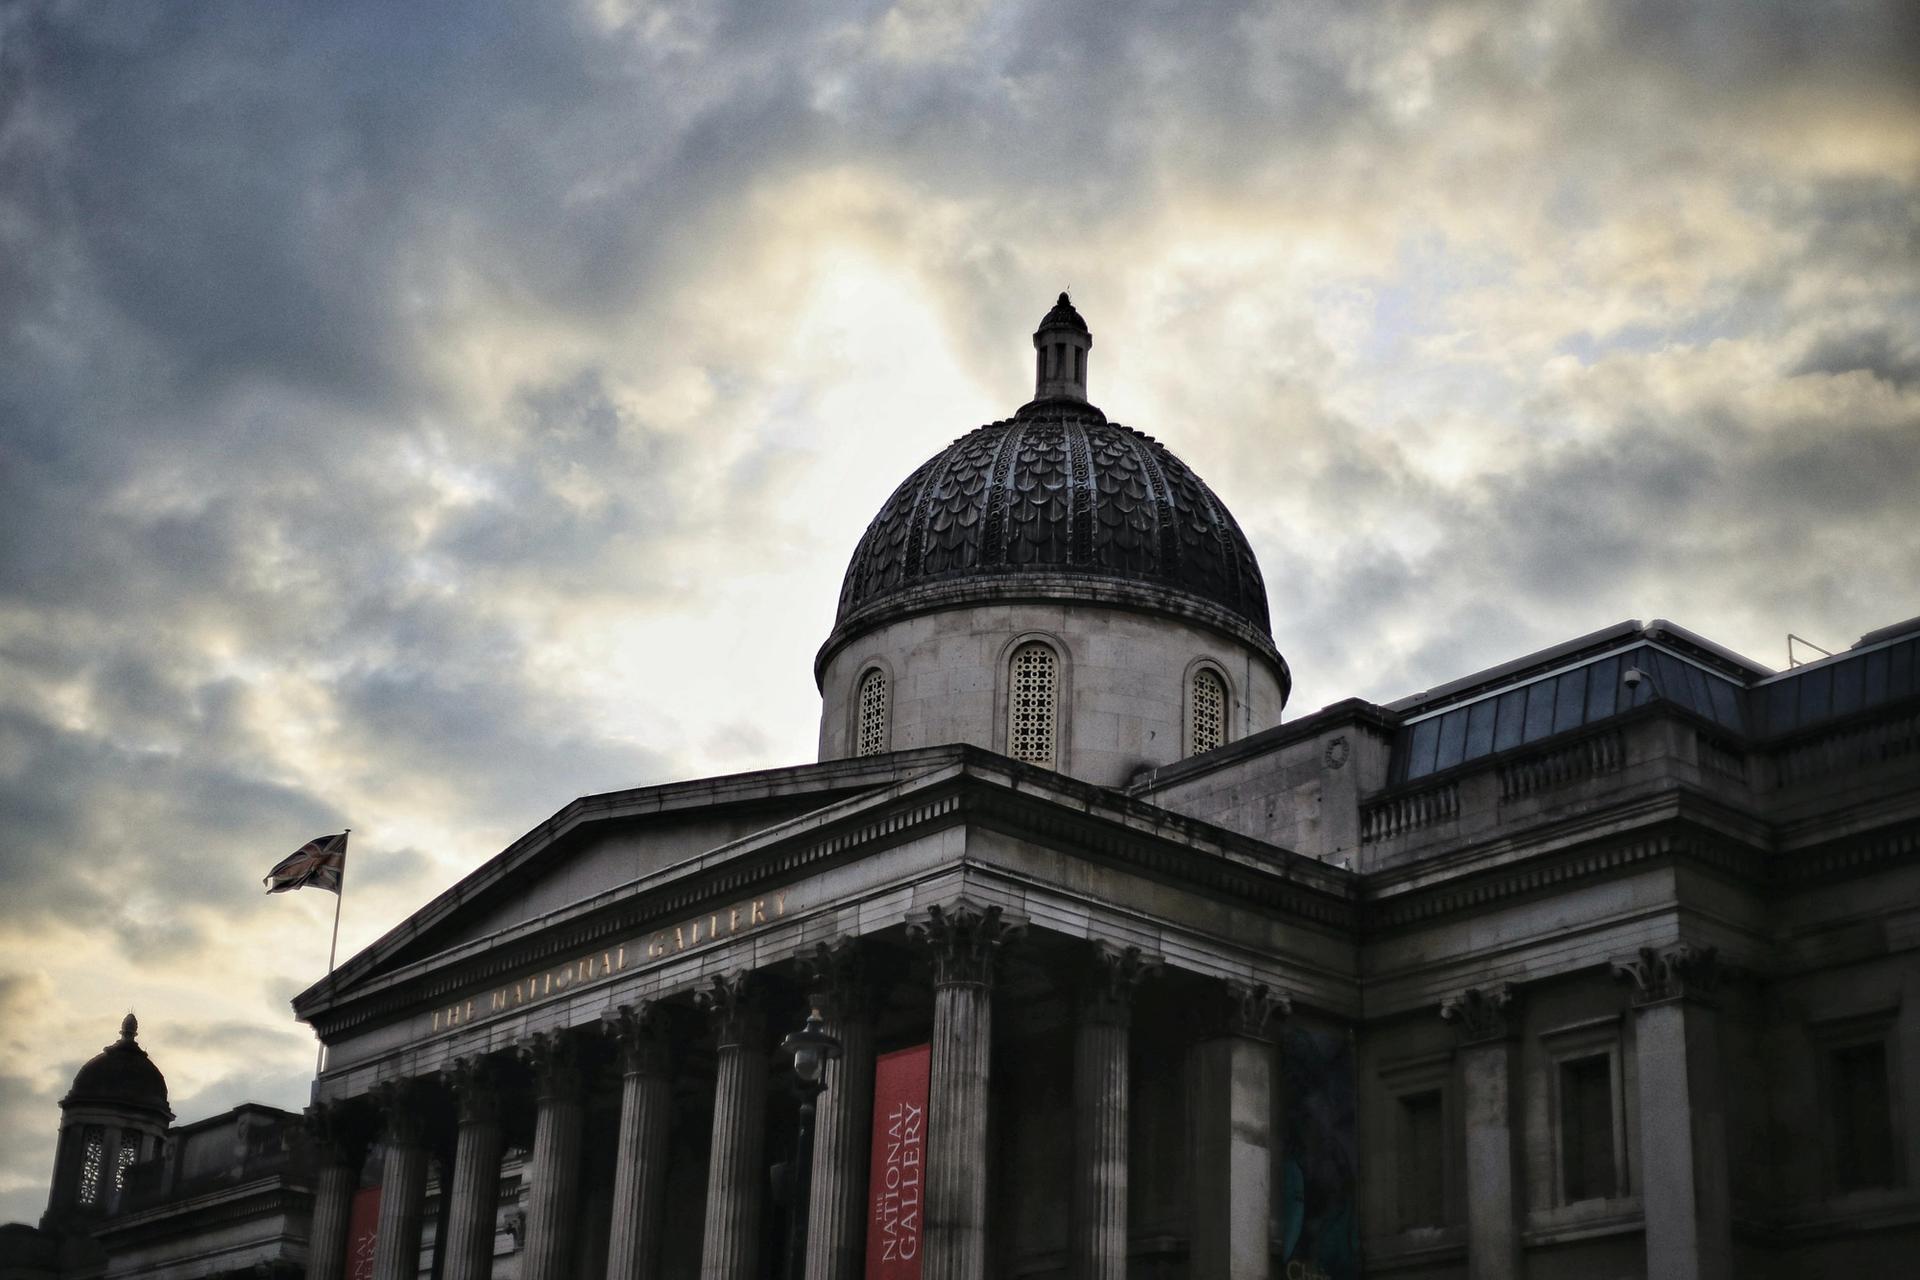 National Gallery, London will reopen on 8 July after being closed for 111 days © Daniel H. Tong